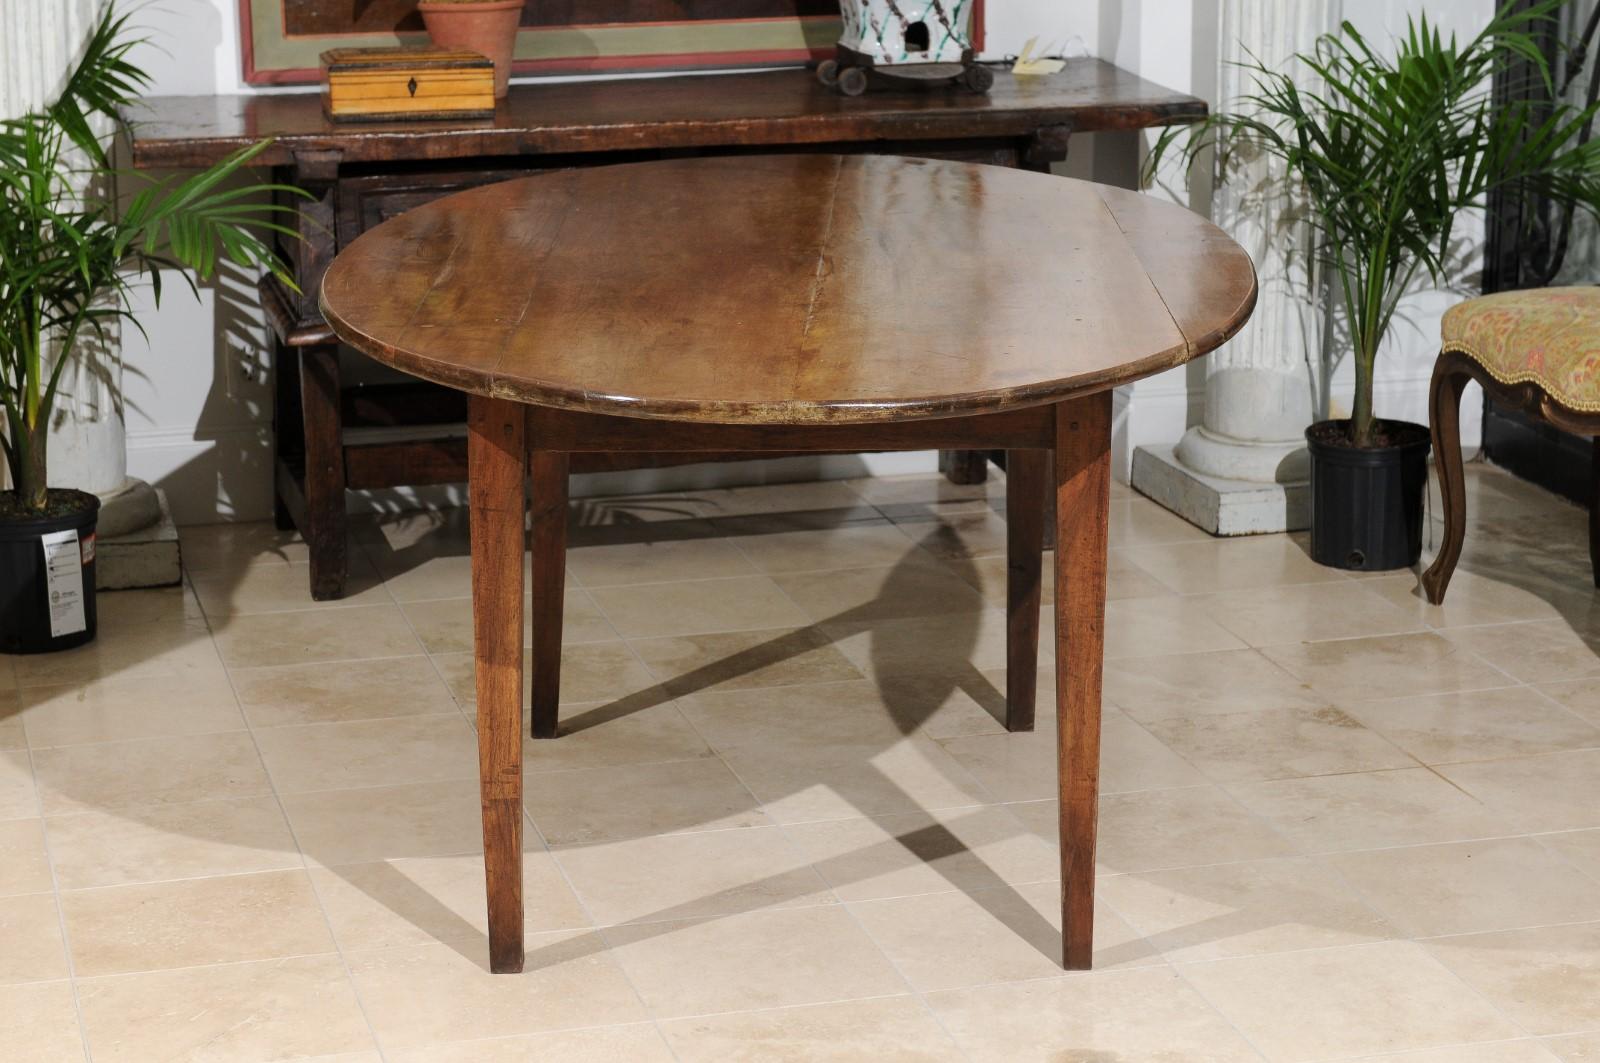  French Oval Farm Table with Tapered Legs 3